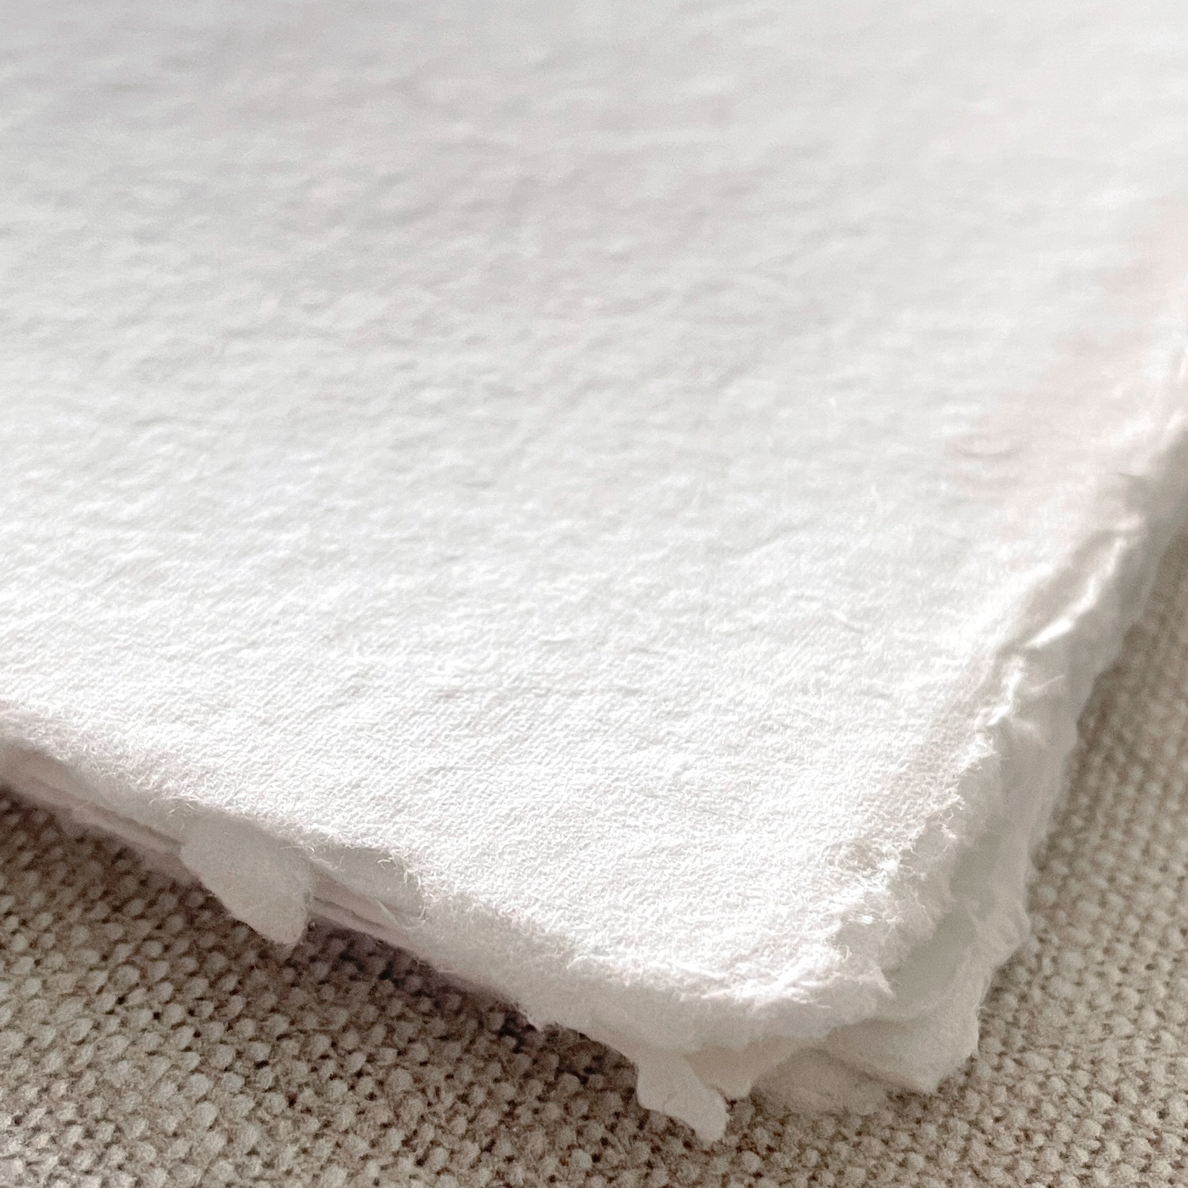 White handmade paper with a deckled edge.  Recycled cotton rag paper.  Vegan handmade paper for watercolour painting, crafts, calligraphy and invitations.   By The Natural Paper Company